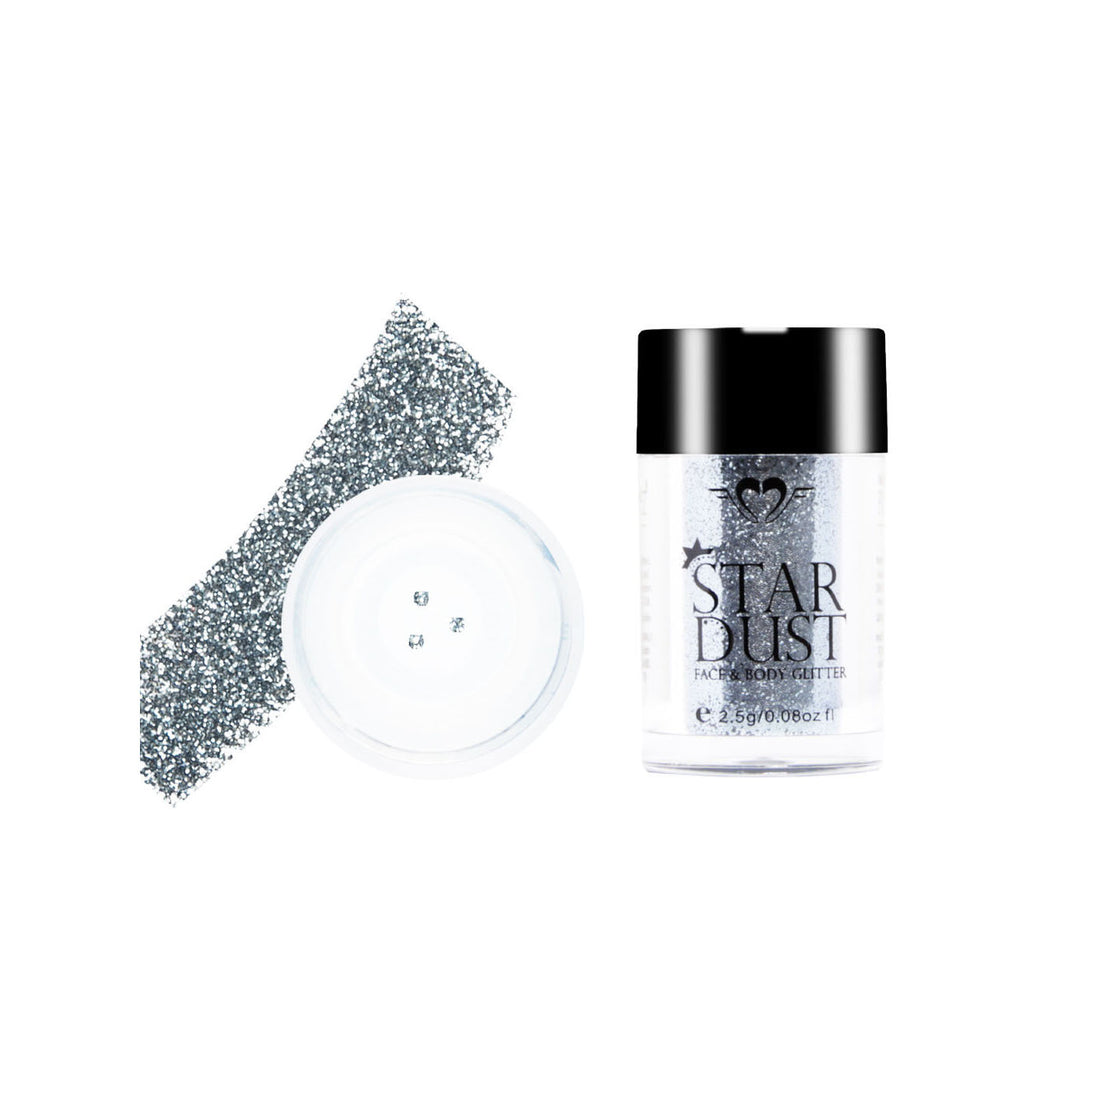 Daily Life Forever52 Star Dust Face & Body Glitter - Rampage (2.5G)-3